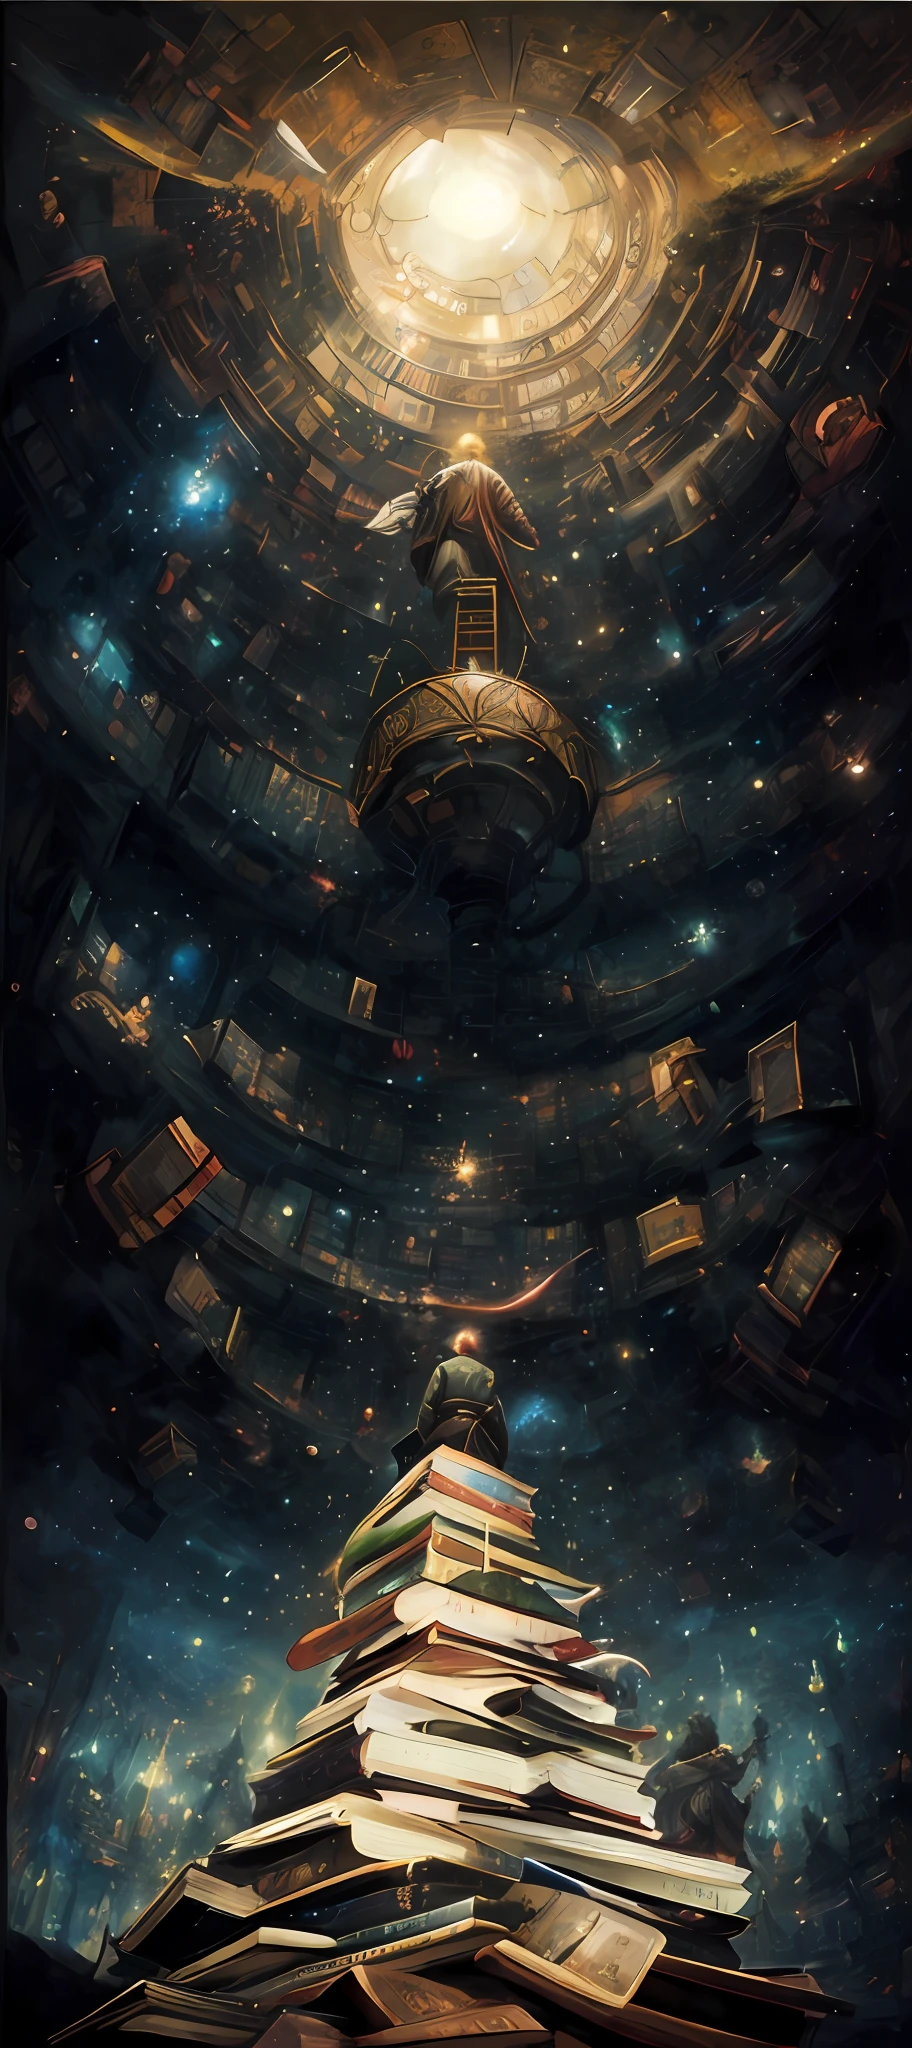 There is a painting of a stack of books, magical realism painting, science fantasy painting, artwork from the Borne Space Library, Infinite Celestial Library, inspired by Maxim Verehin's Tomasz Alen Kopera, Tadeusz Pruszkówski's Library of Babel, Tadeusz Pruszkówski's Library of Babel